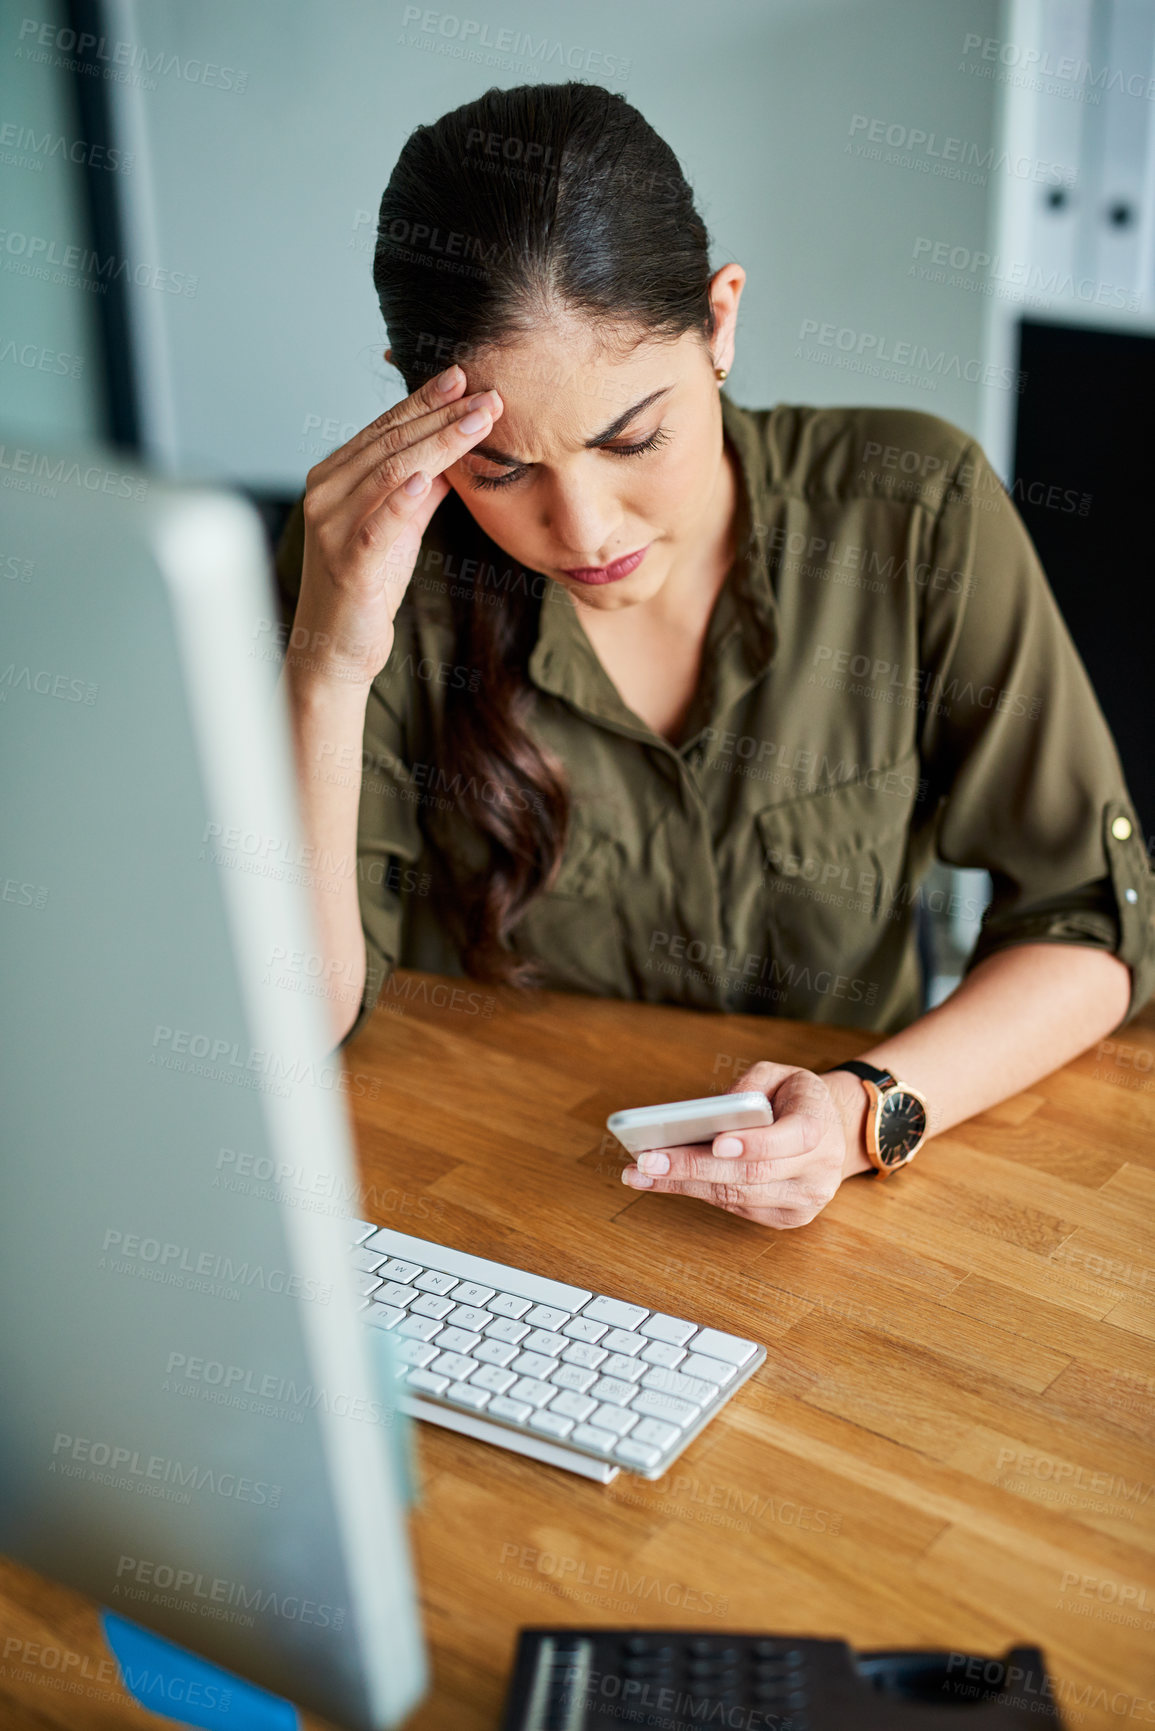 Buy stock photo Shot of a young businesswoman looking stressed out while using a cellphone in an office